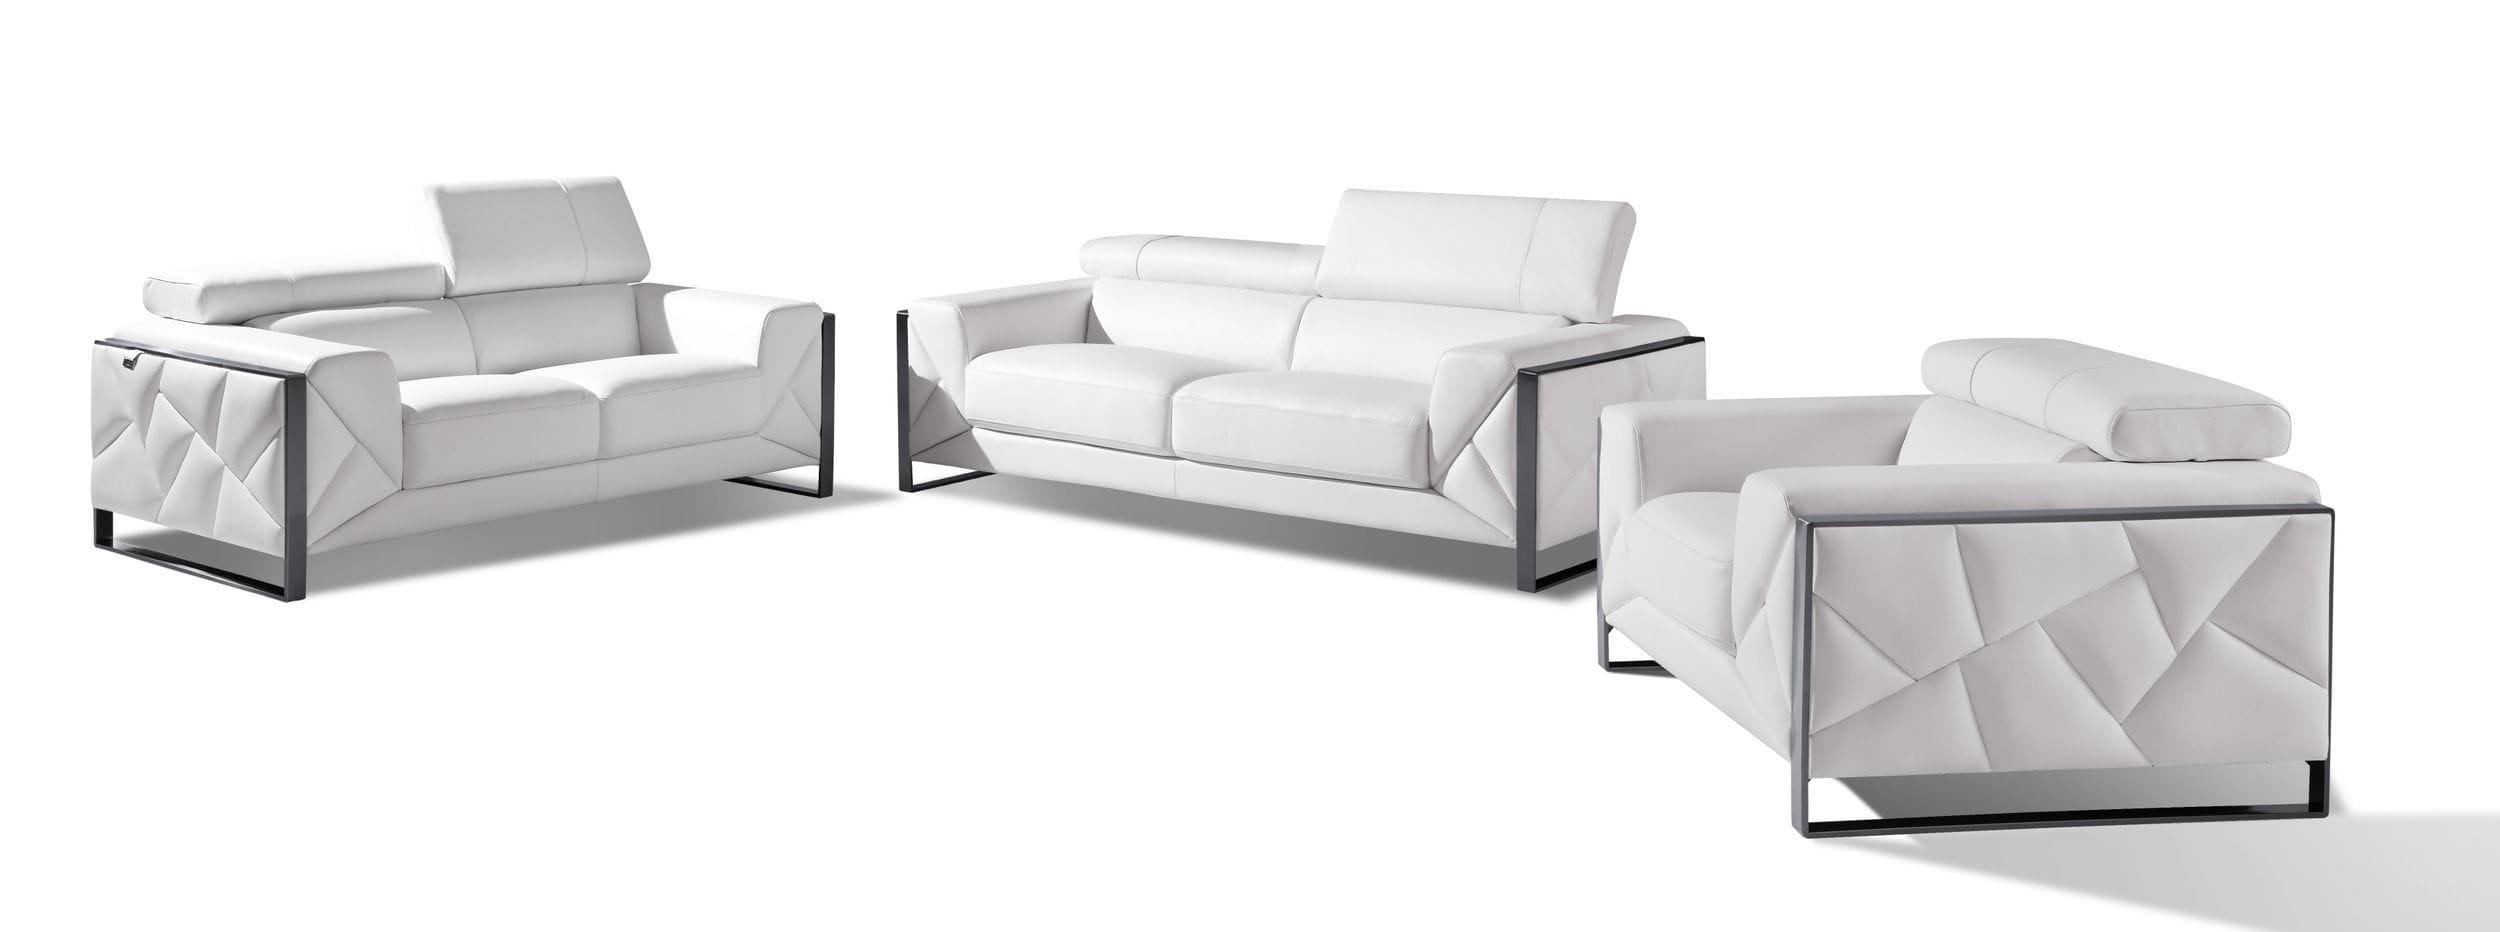 Global United 903 Sofa Loveseat and Chair Set